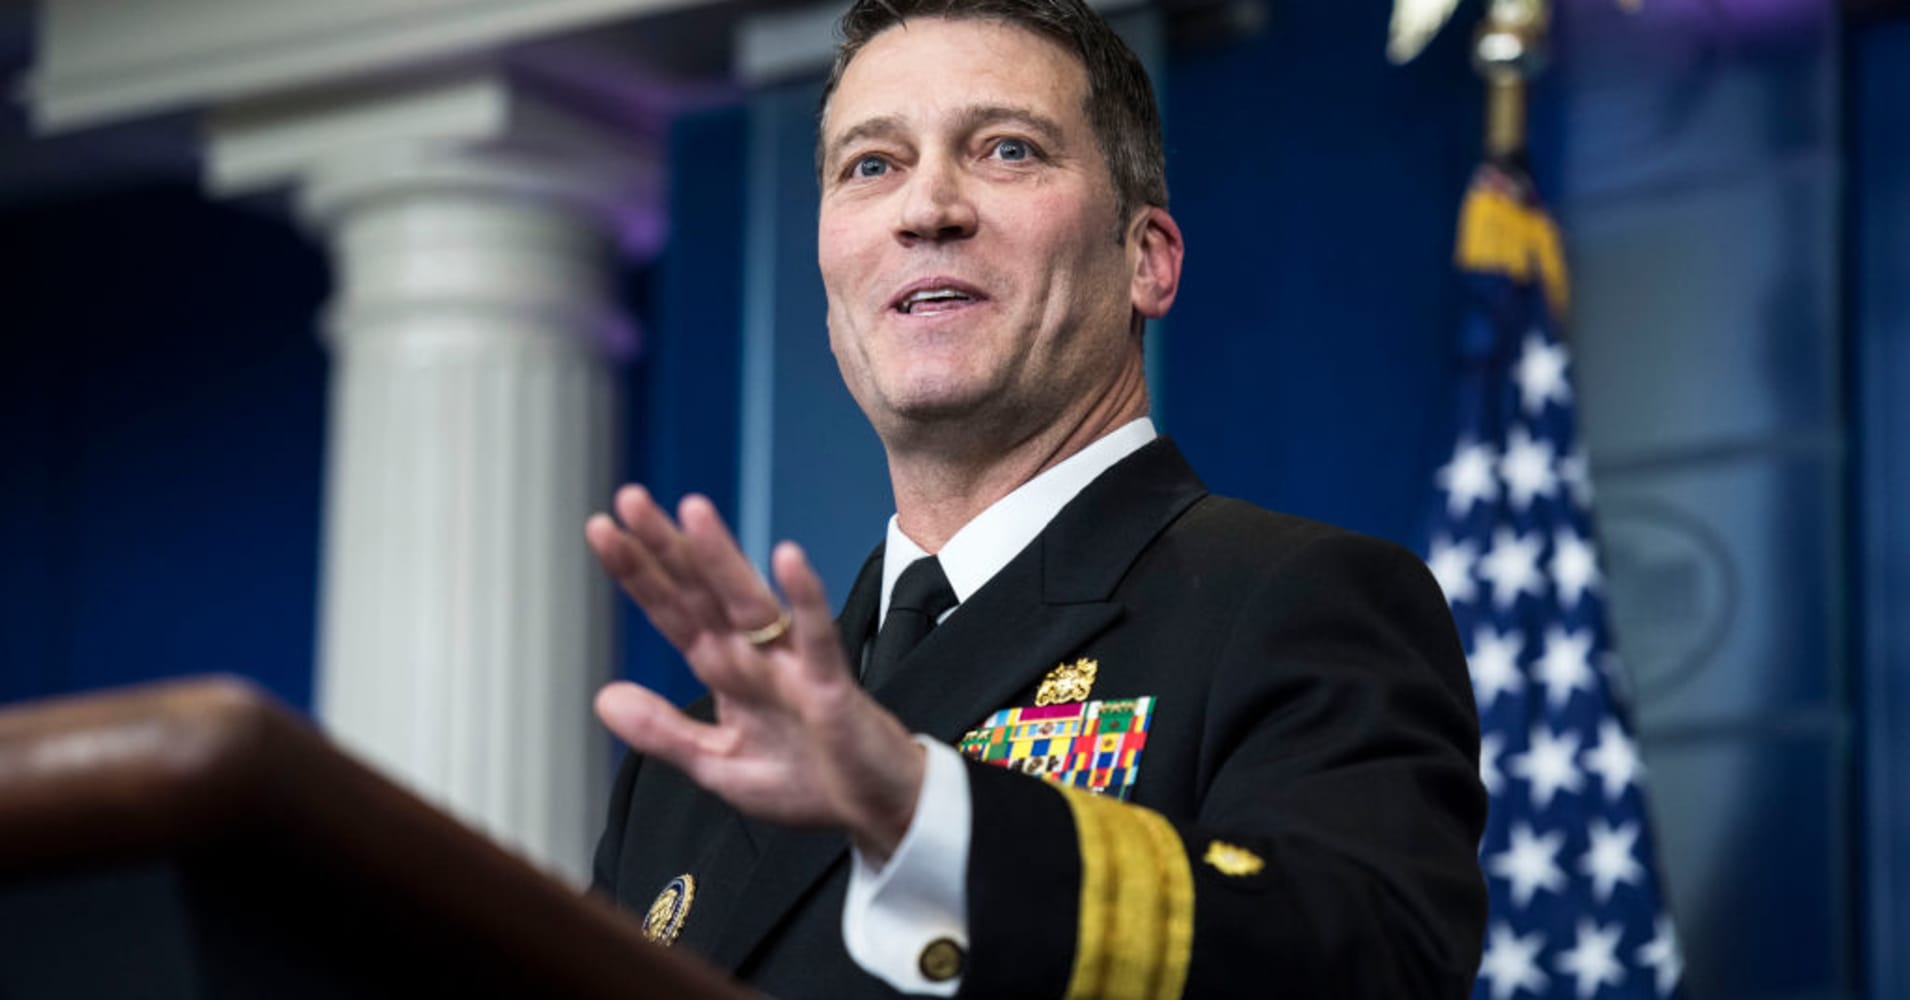 Trump VA pick Ronny Jackson allegedly gave opioids to staffer, wrecked car while drunk